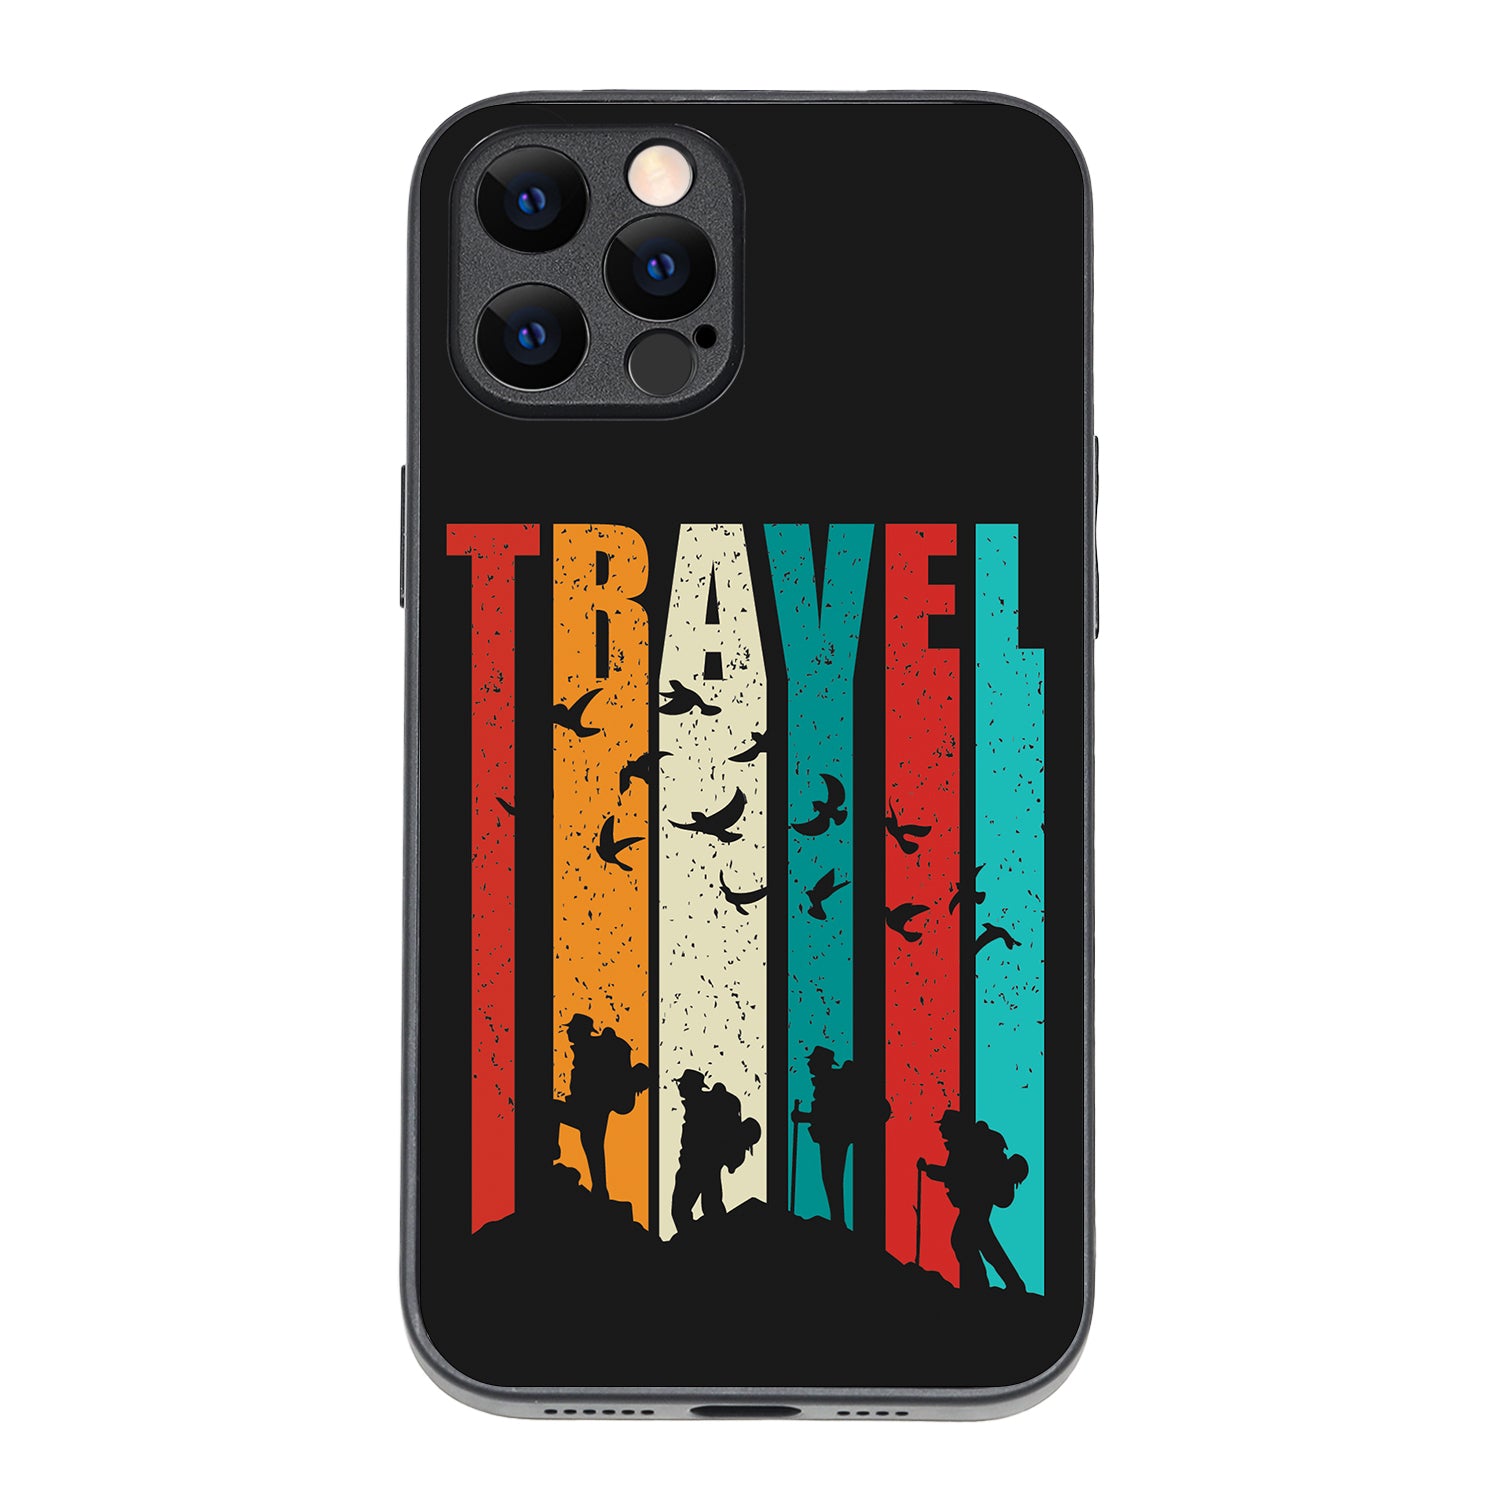 Travel Travelling iPhone 12 Pro Max Case